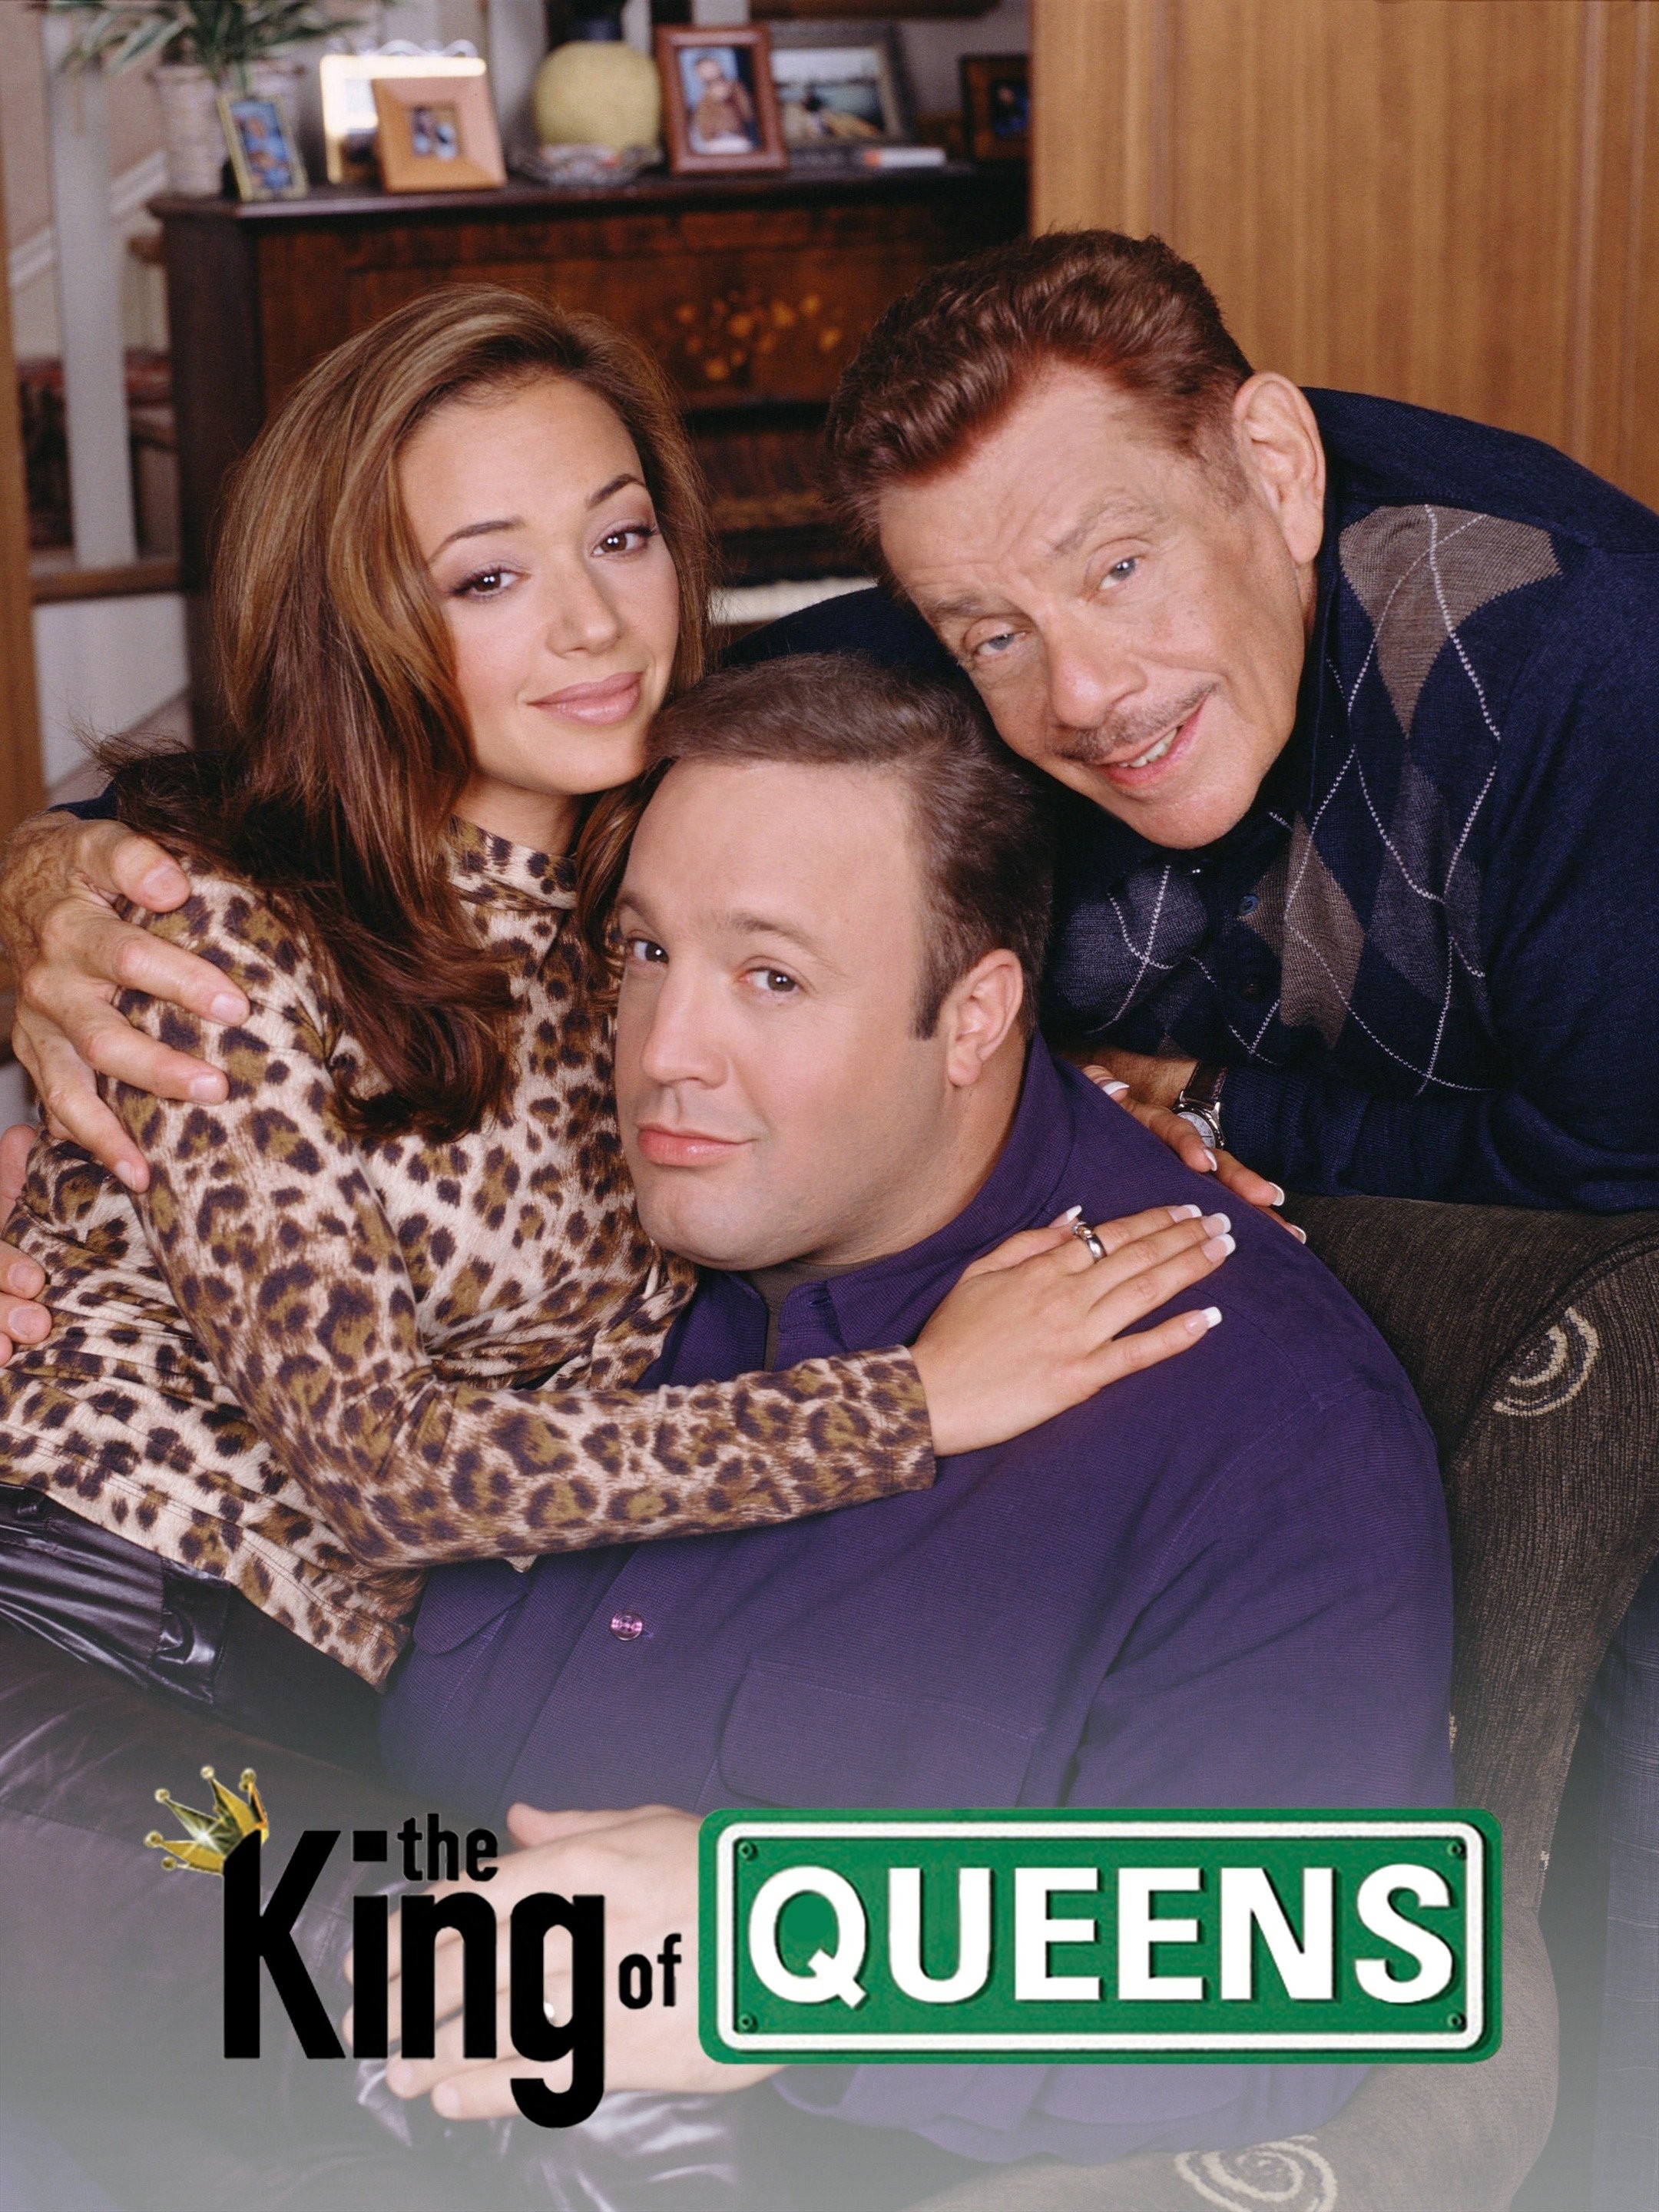 The King of Queens 